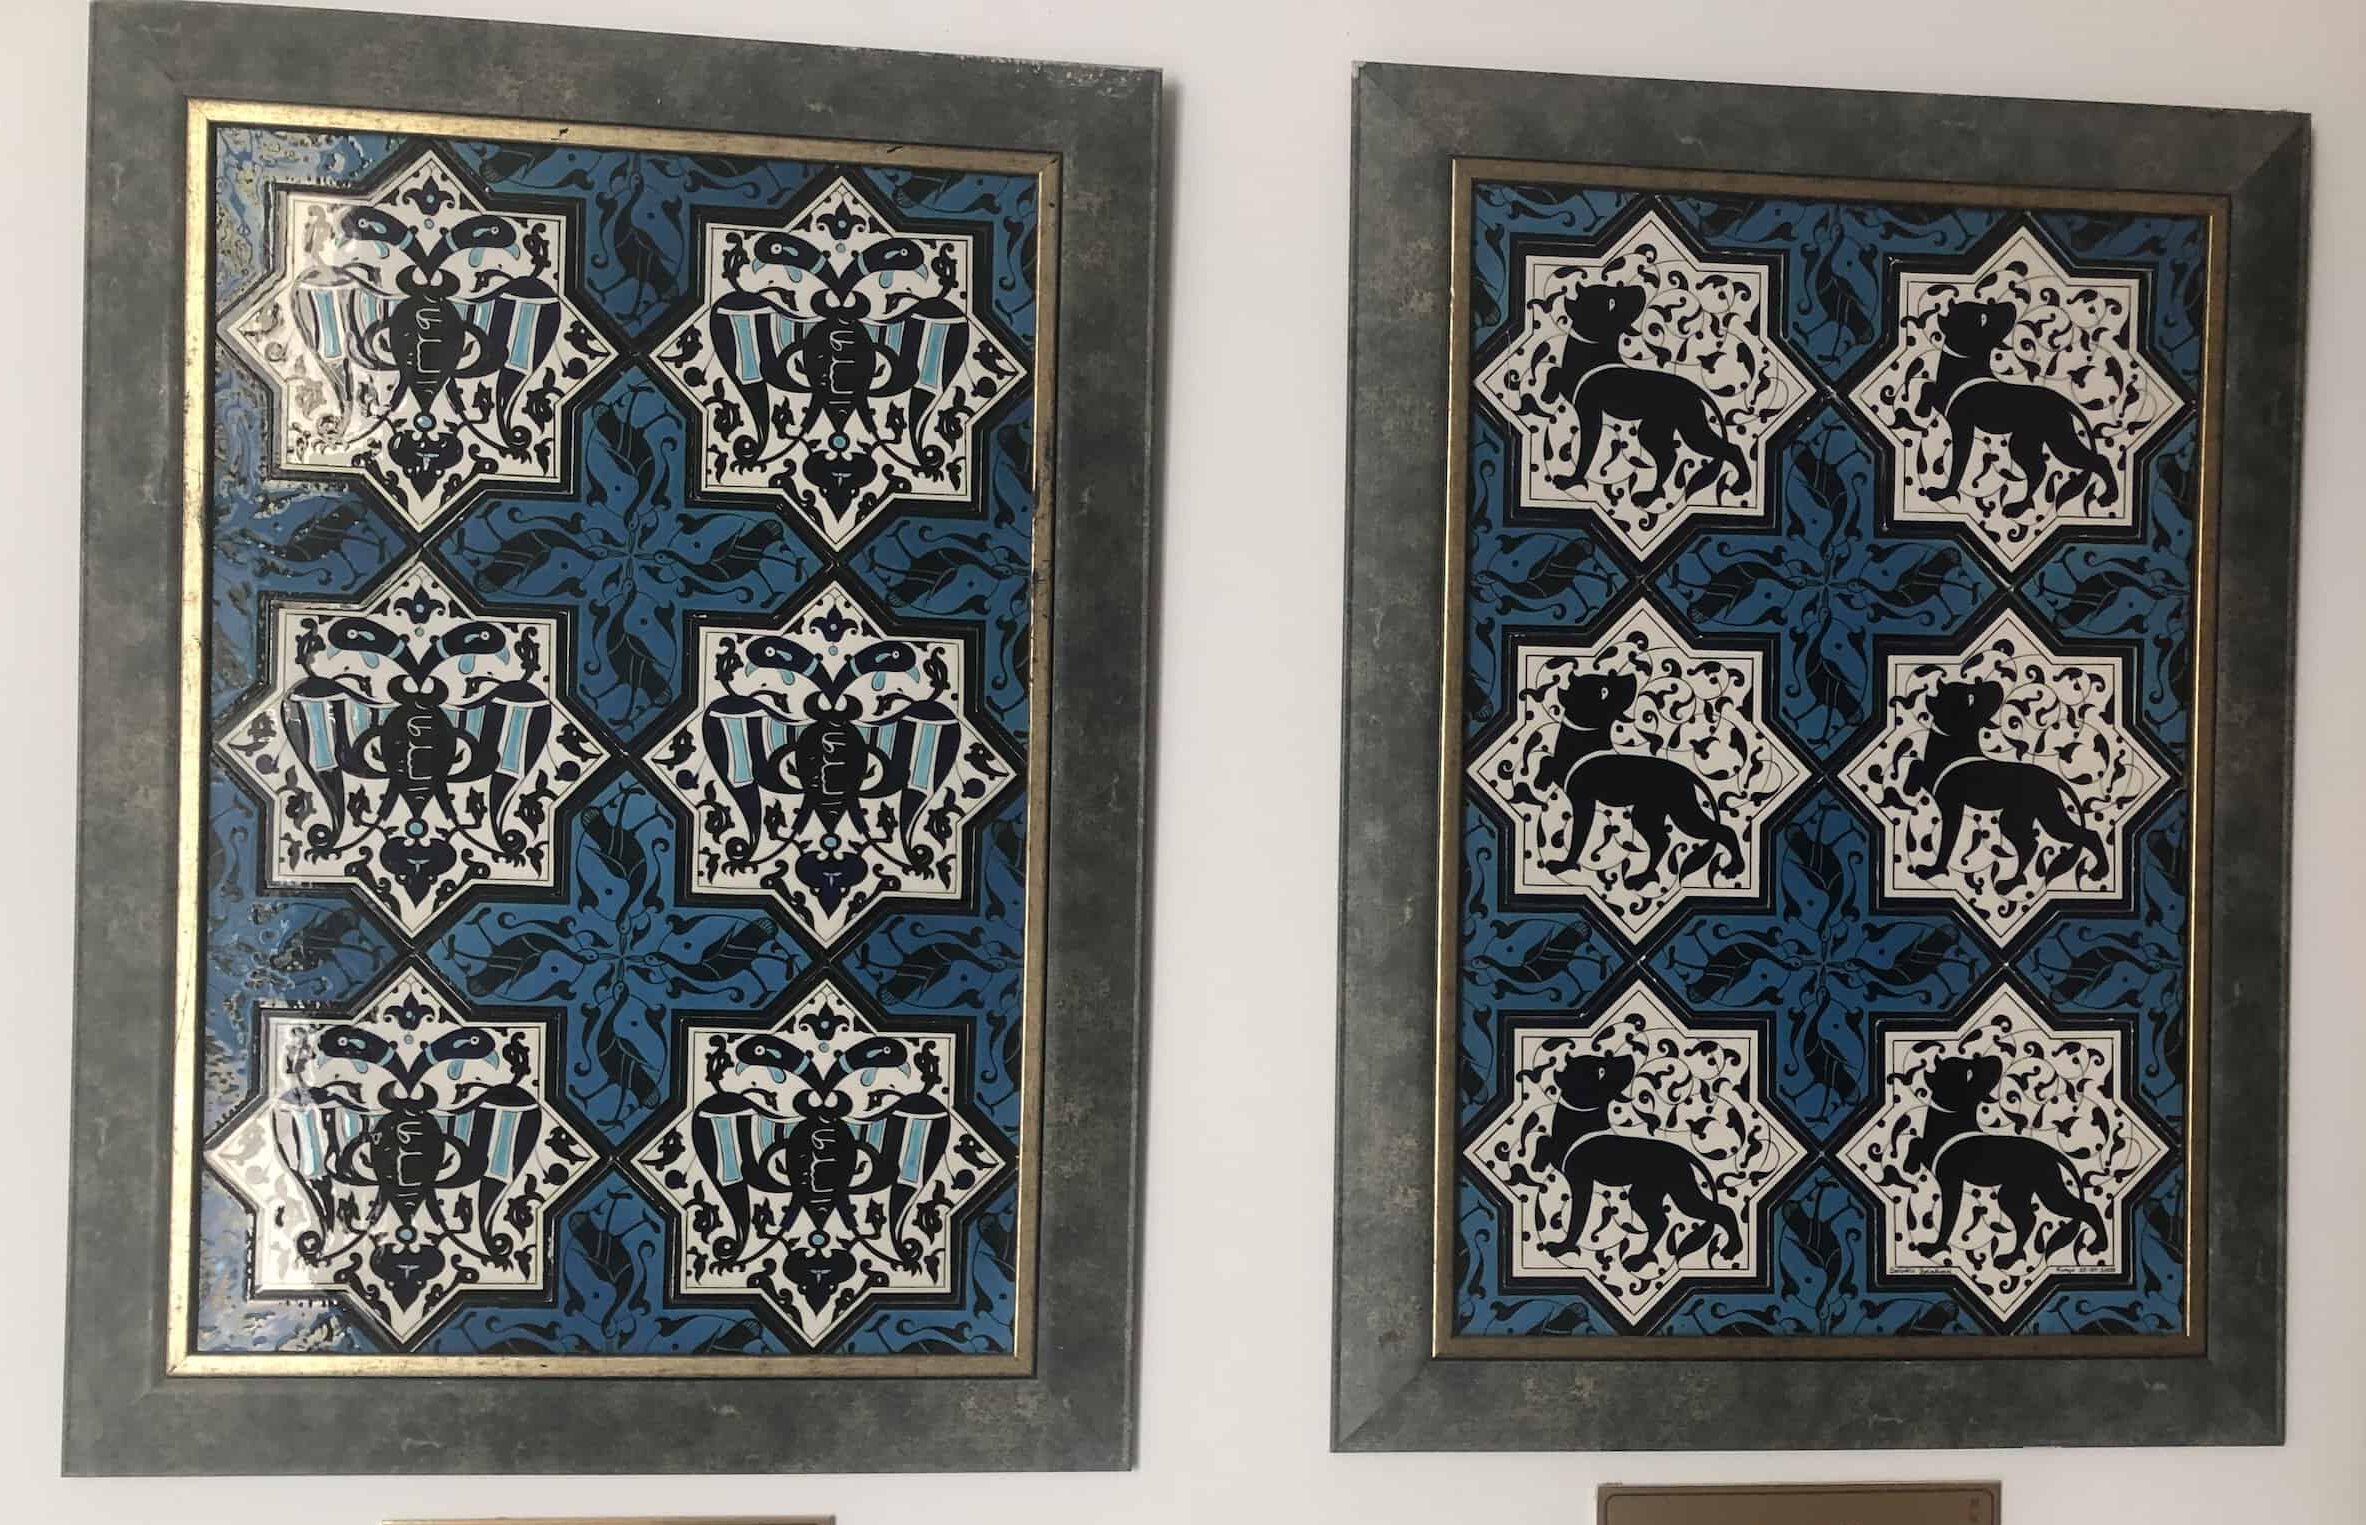 13th century tiles excavated from Kubadabad Palace in the Seljuk Hall at the Harbiye Military Museum in Istanbul, Turkey